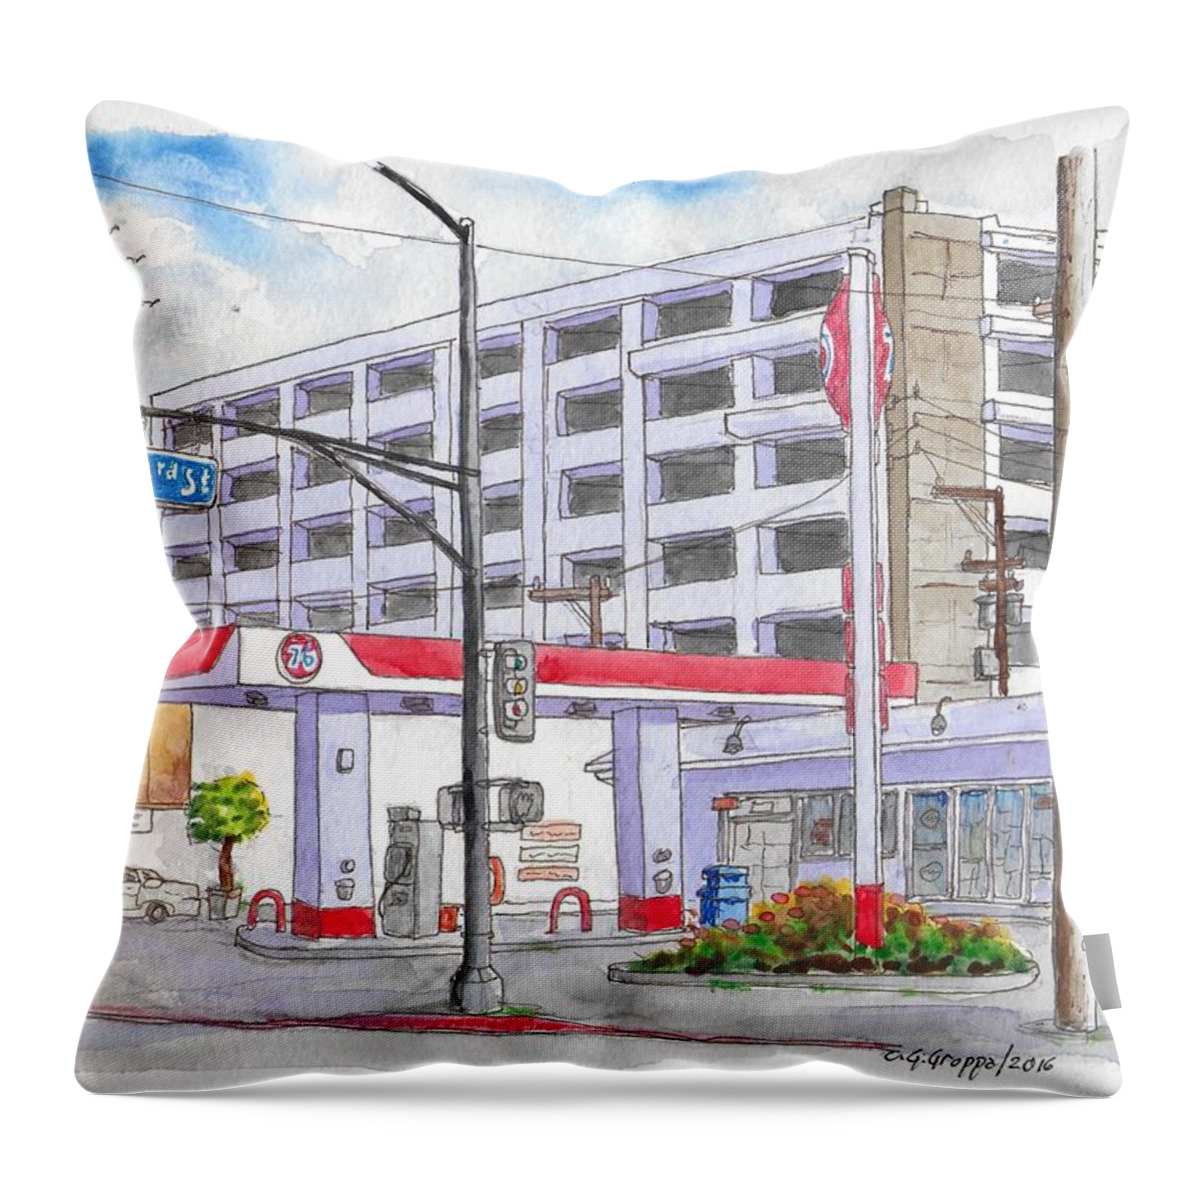 76 Gas Station Throw Pillow featuring the painting 76 Gas Station in 3rd Street and Robertson Blvd, Beverly Hills, California by Carlos G Groppa